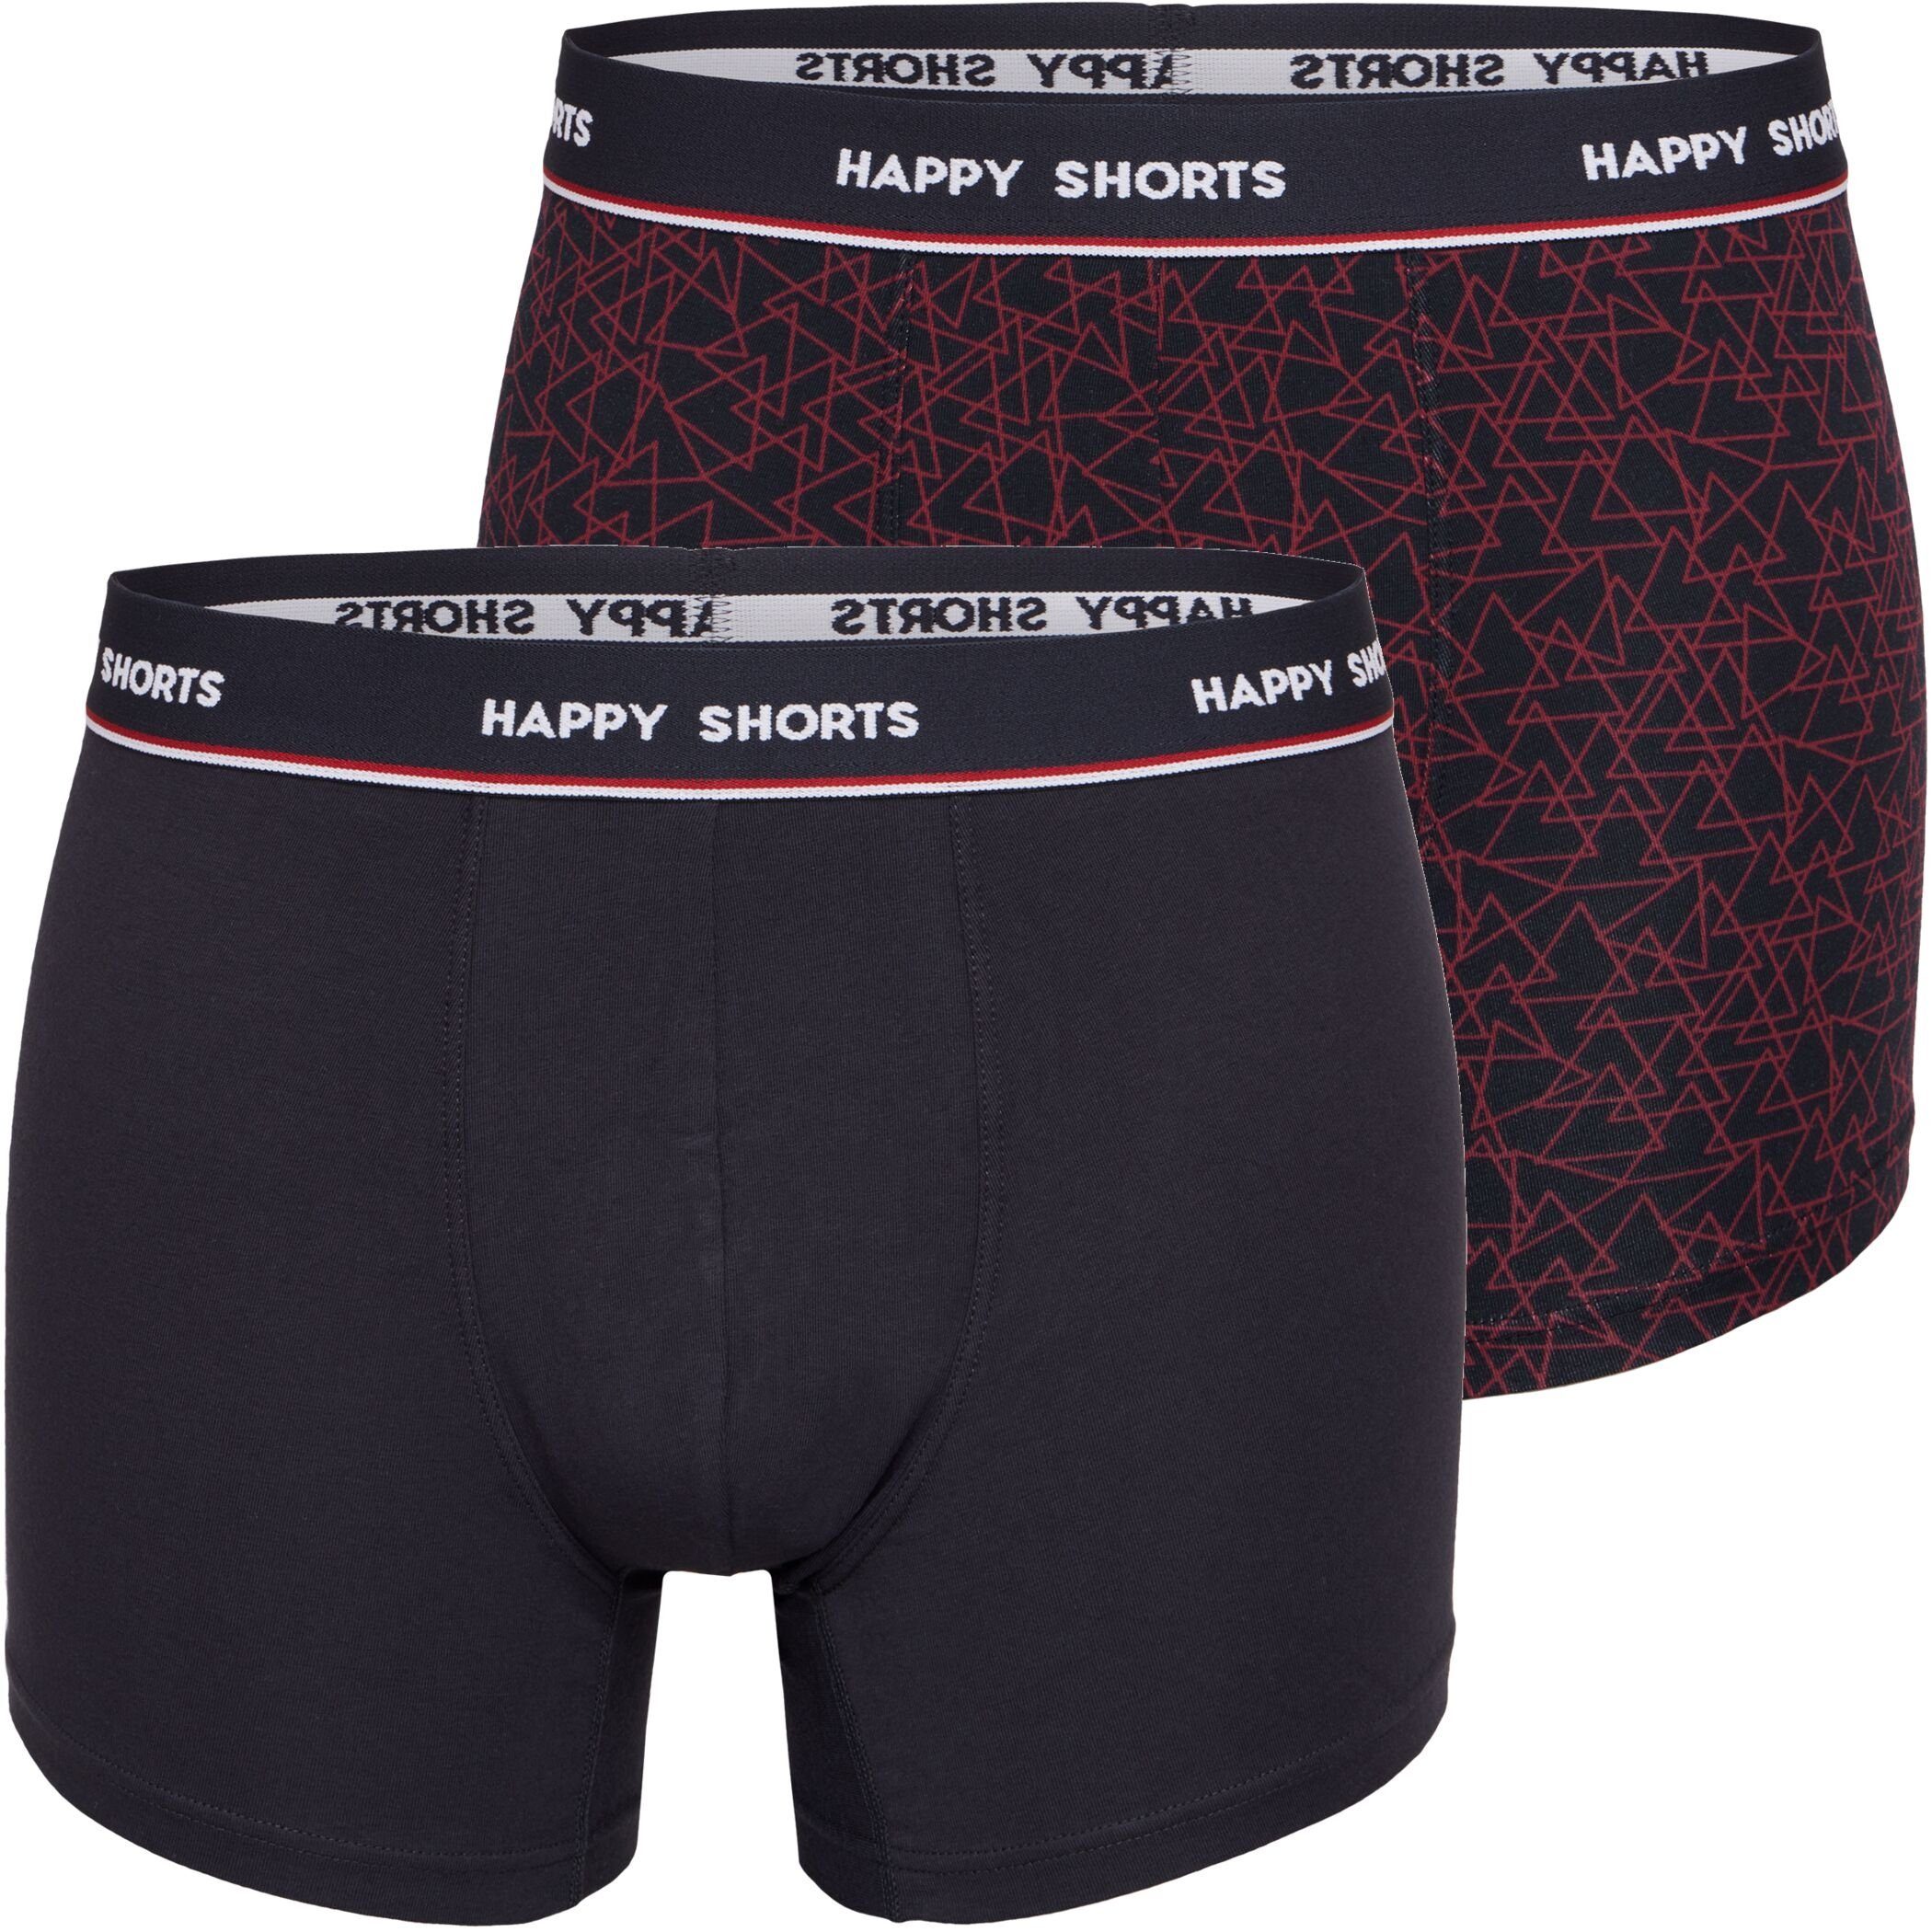 HAPPY SHORTS Trunk 2 Happy Shorts Pants Jersey Trunk Herren Rote Dreiecke - Red Triangles (1-St)